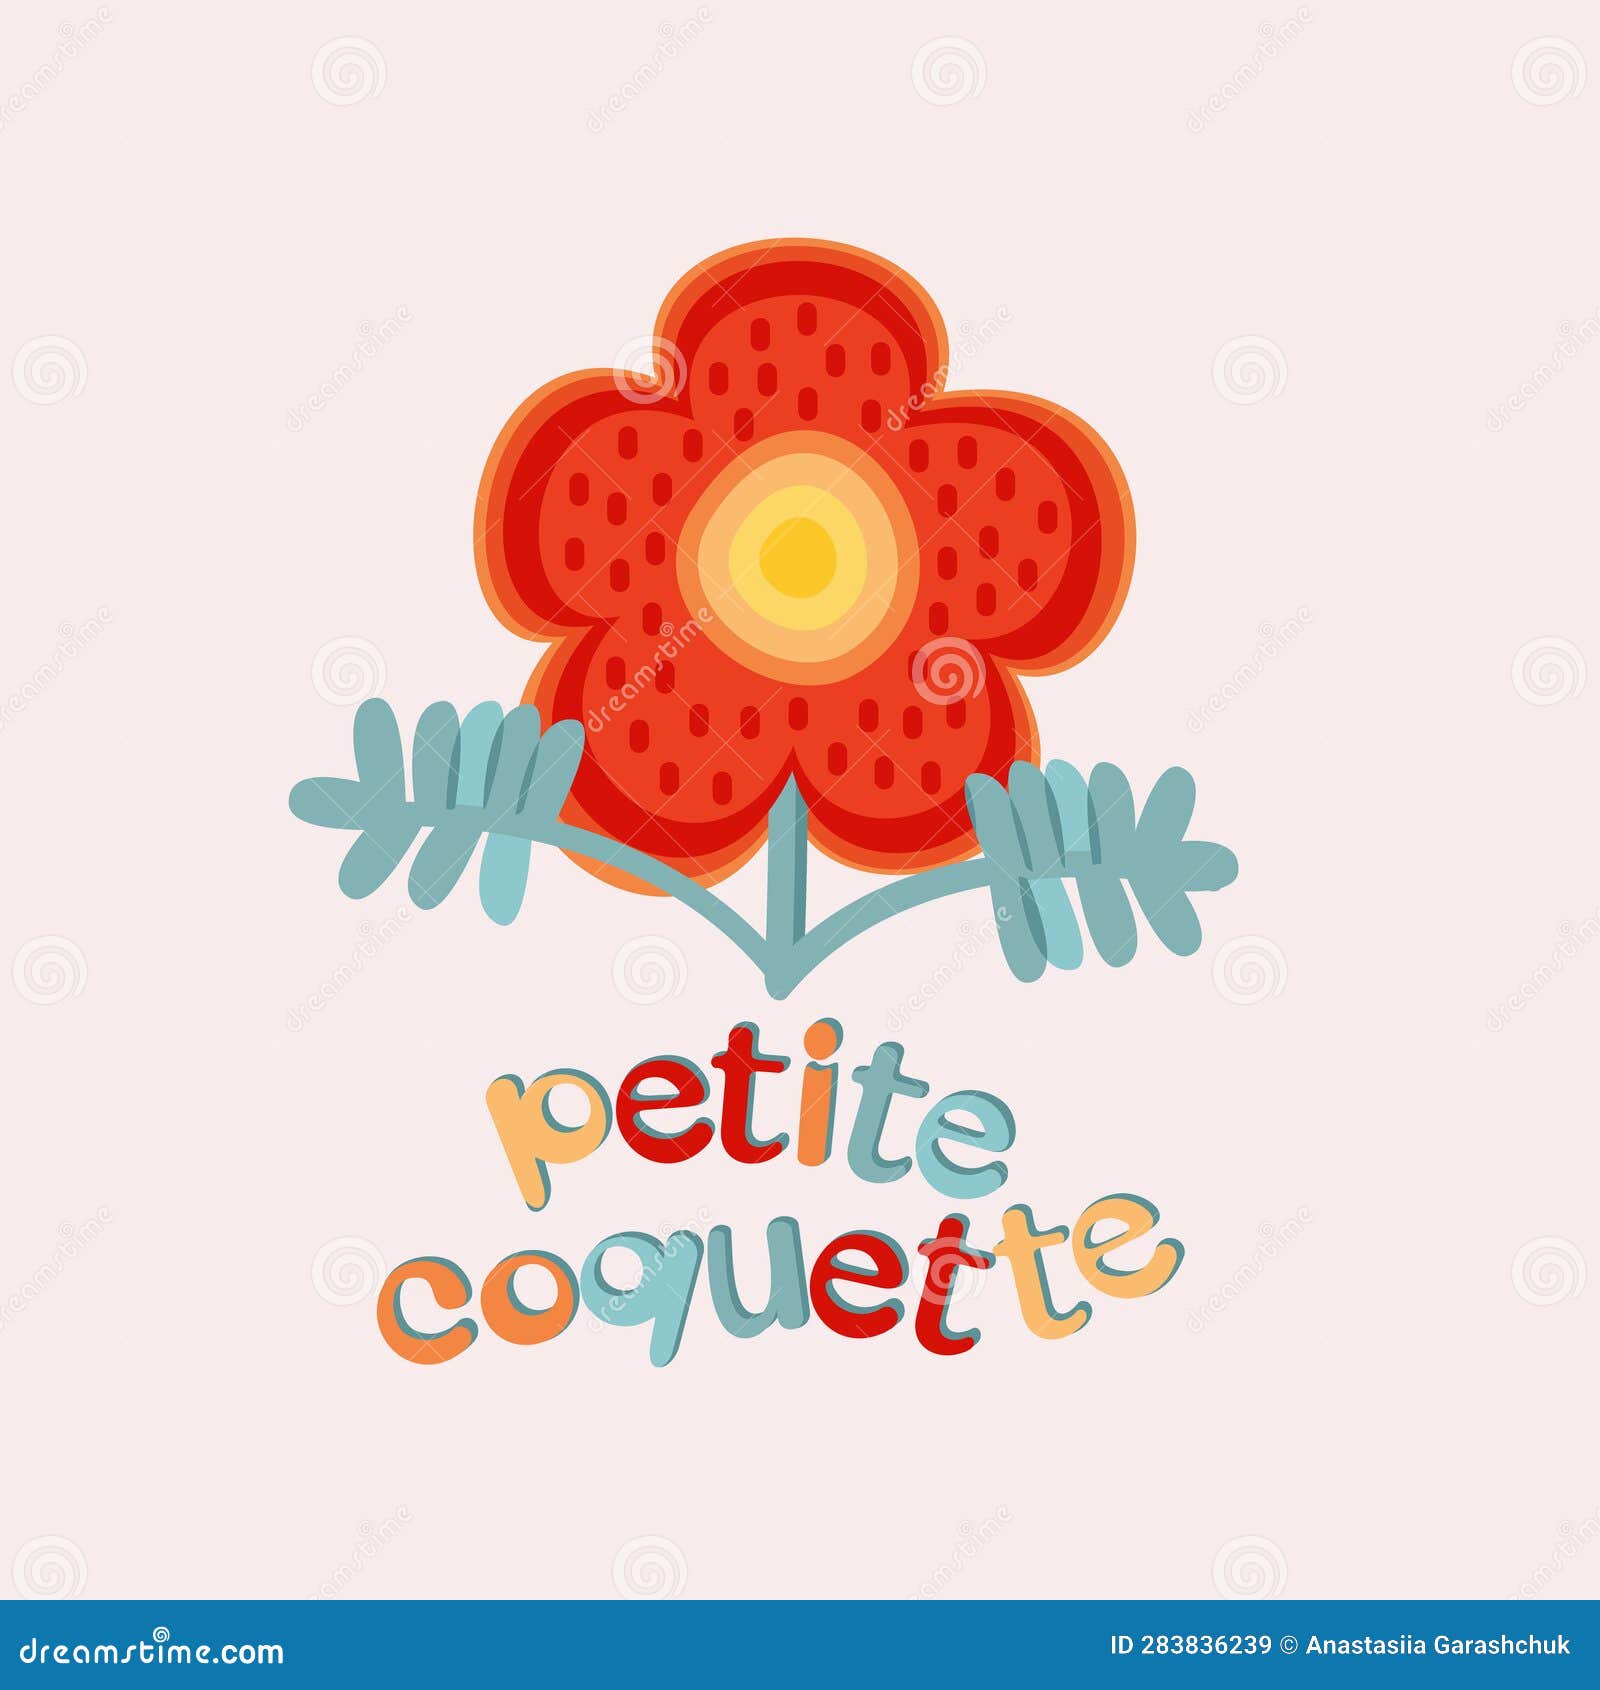 Vector Cute Illustration of Red Daisy with French Lettering Little Coquette.  Petite Coquette Stock Vector - Illustration of floral, botanical: 283836239